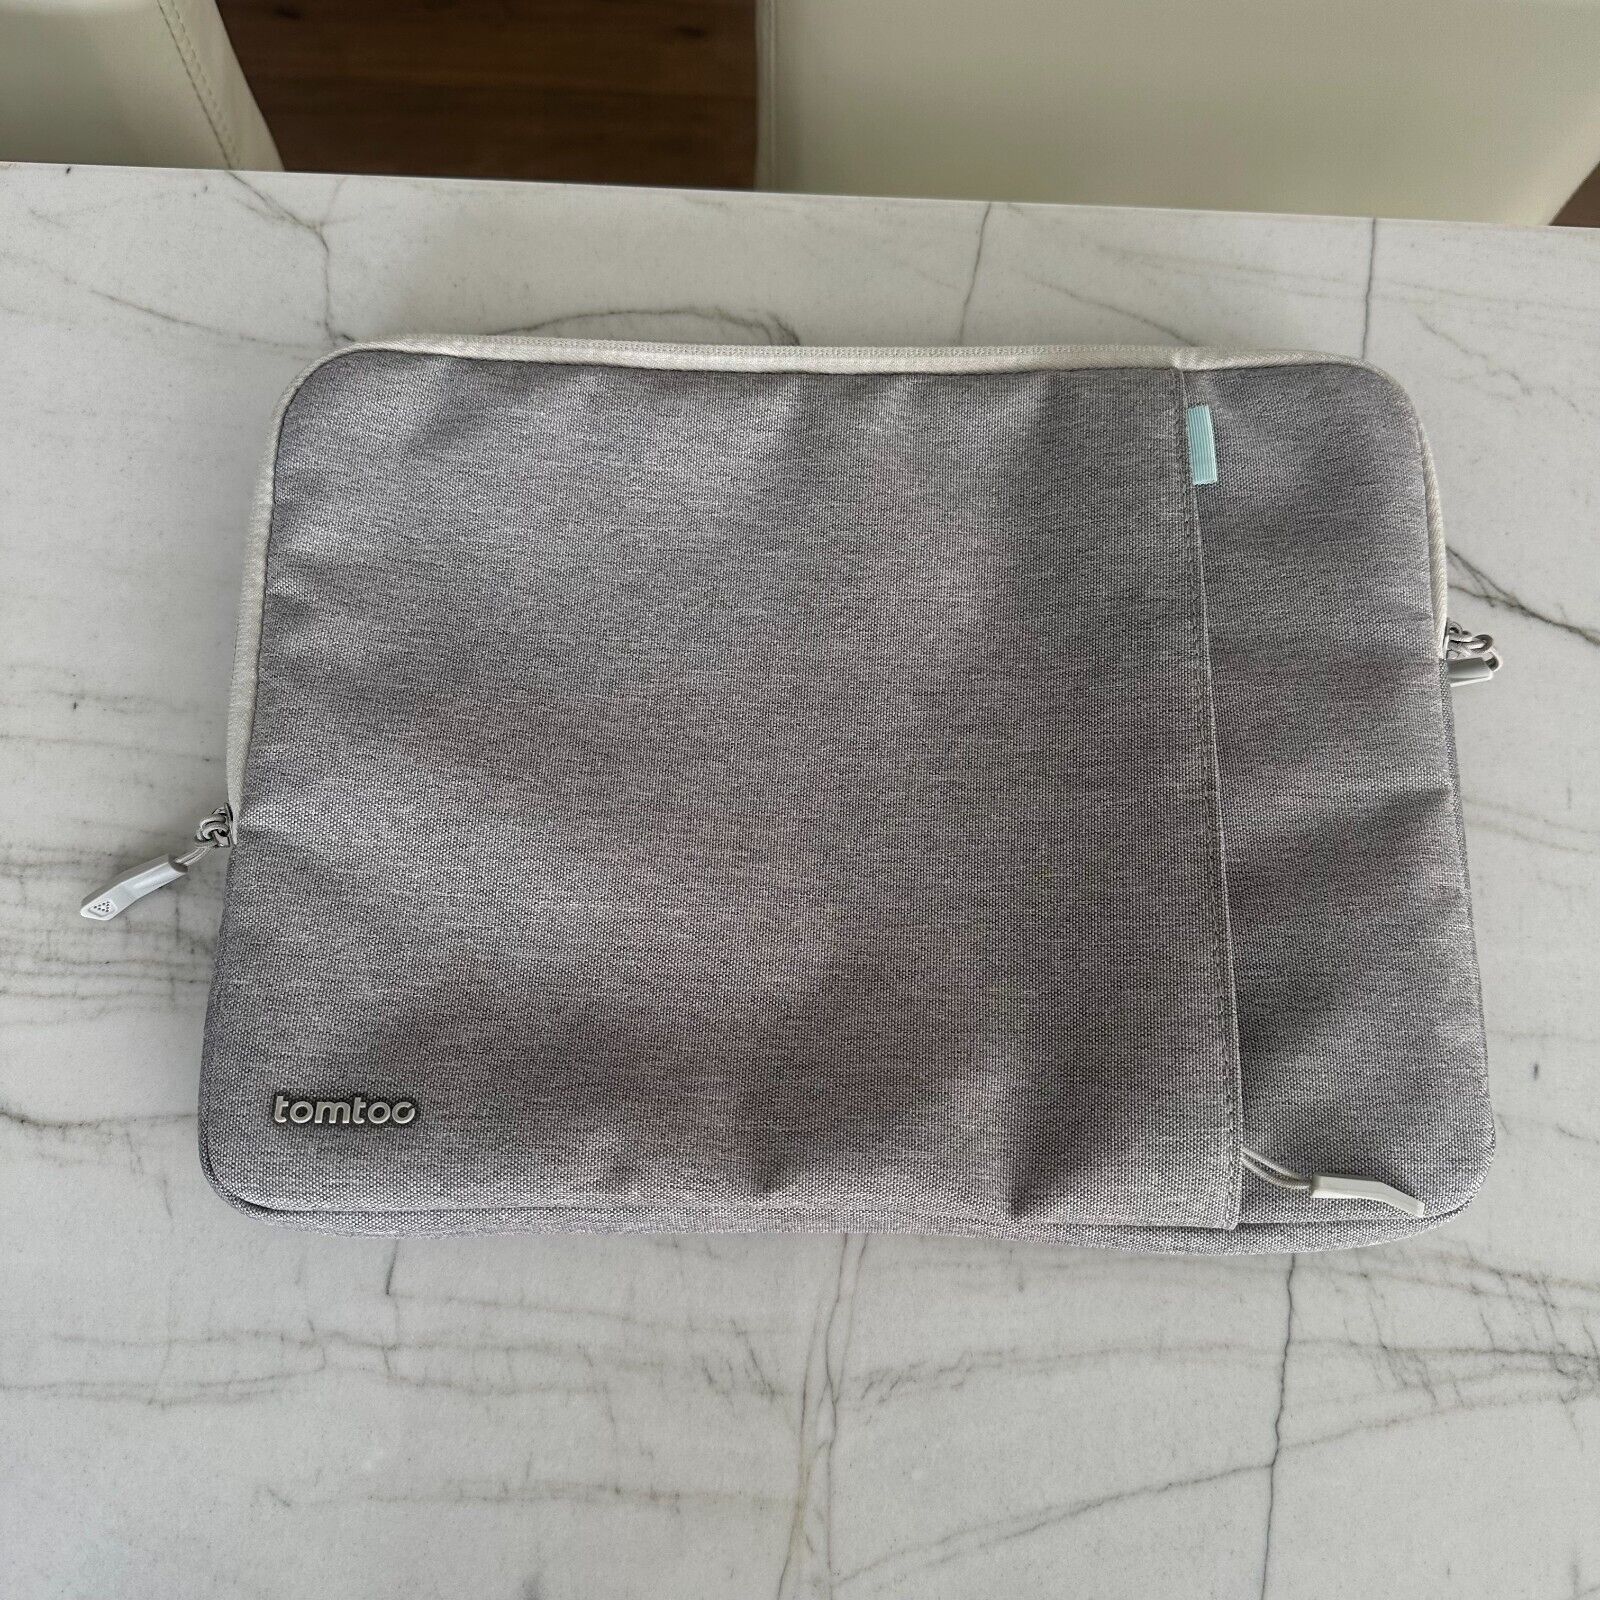 tomtoc 360 protective laptop sleeve Gray Model A14-E02G Pre Owned Good Condition